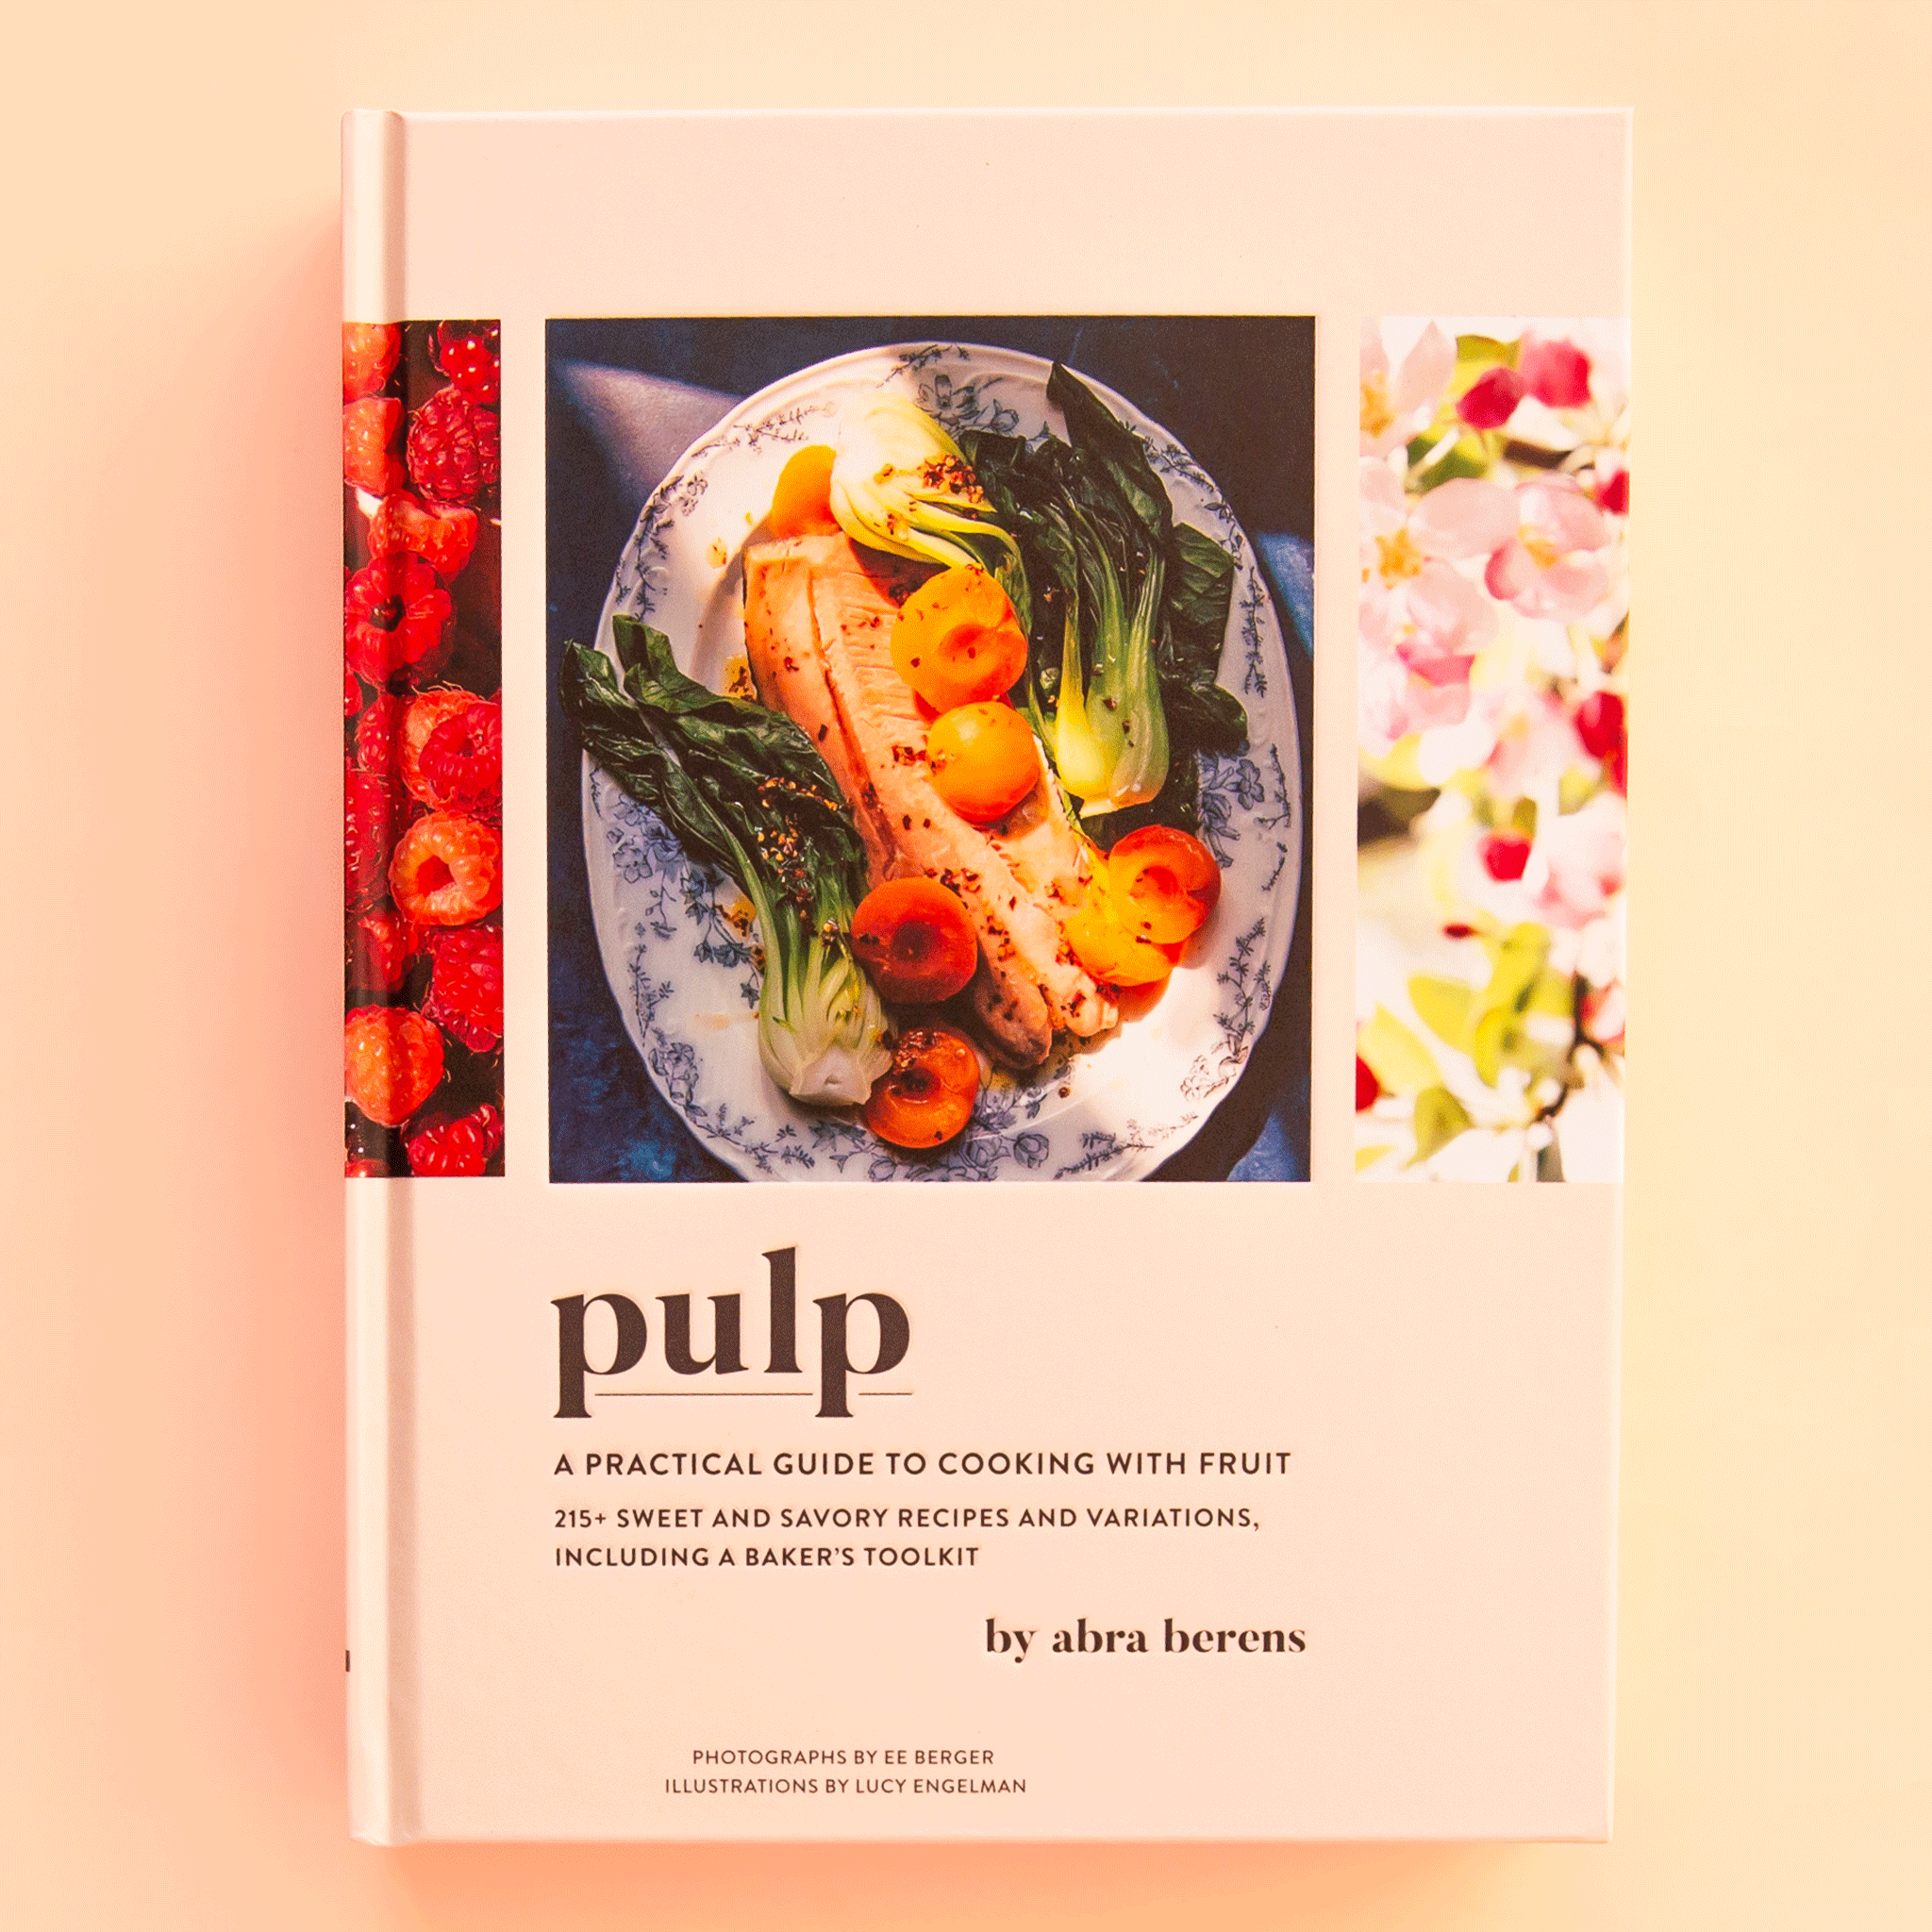 On a tan background is a ivory book cover with a delicious food photograph on the front and the title in black underneath that reads, "pulp", "A Practical Guide To Cooking With Fruit". 